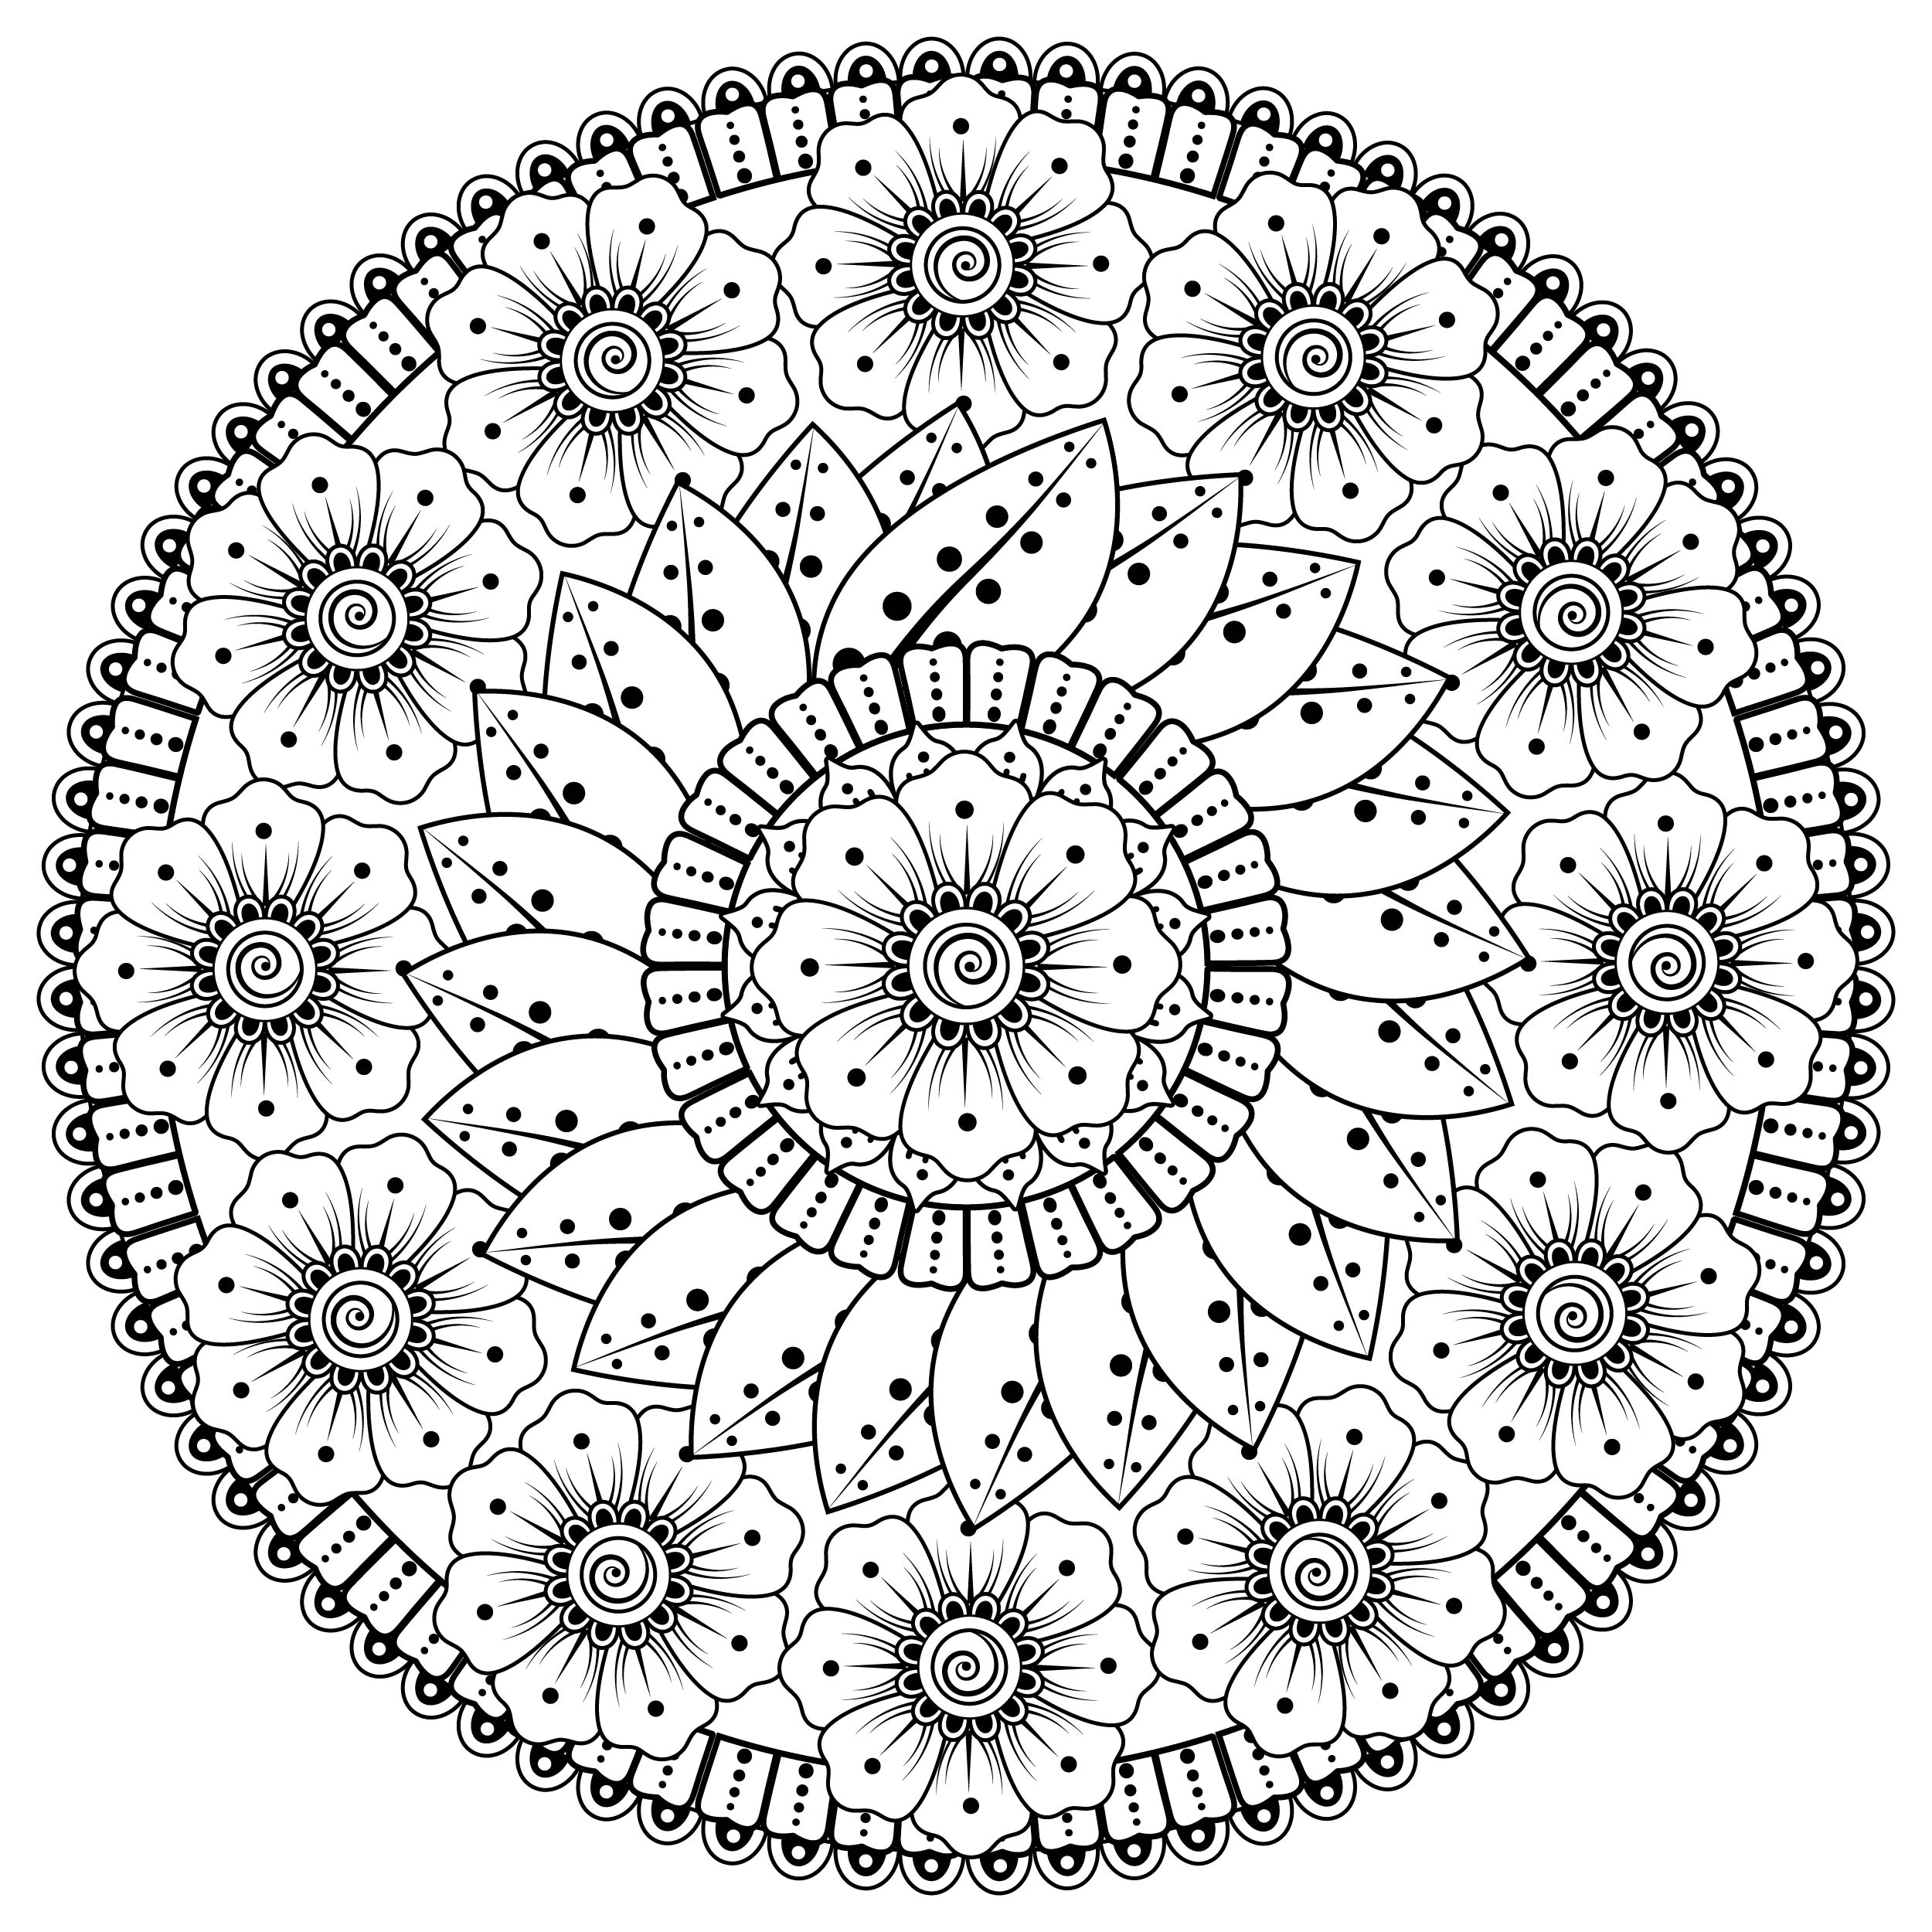 Coloring Book Free Art – Online Coloring Page – HiColoring.com